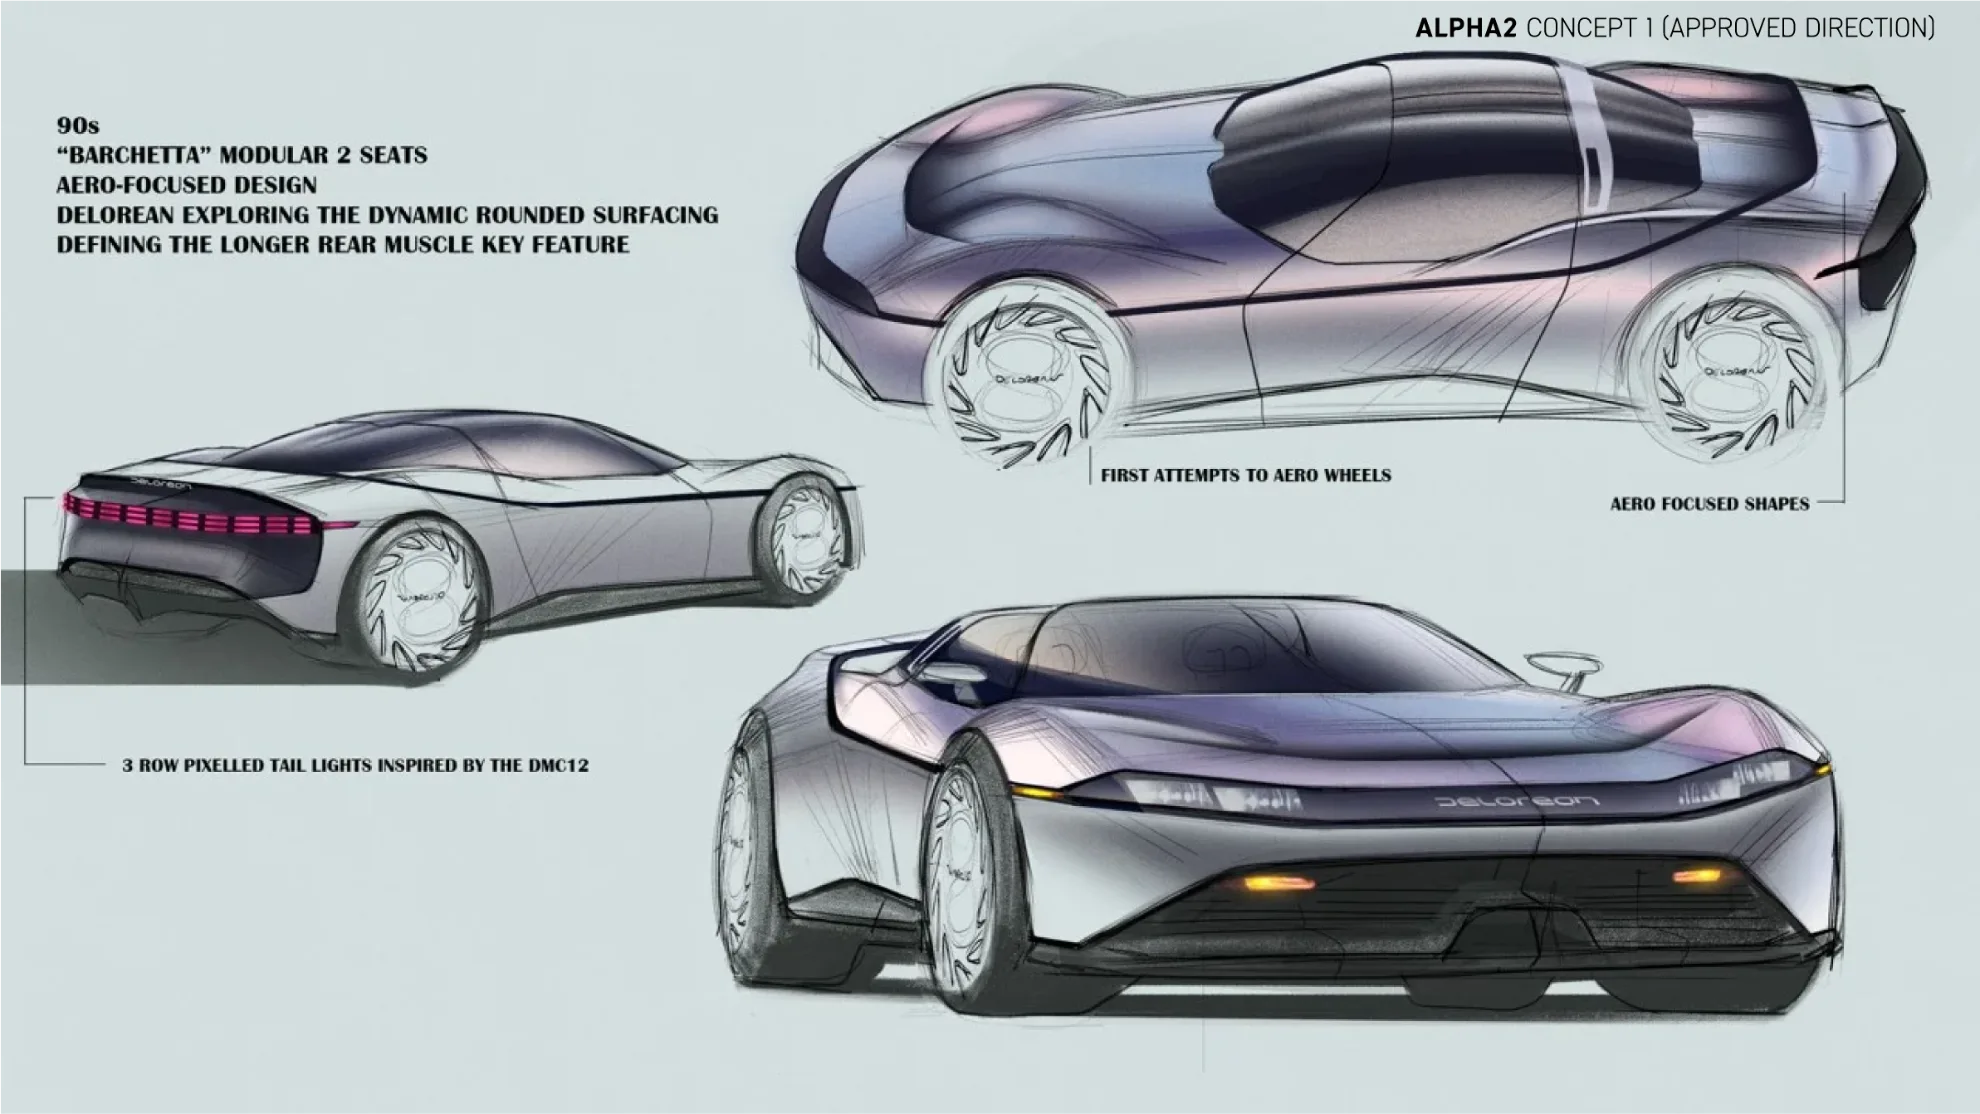 Alpha2 1993 Concept 1 (Approved Direction)